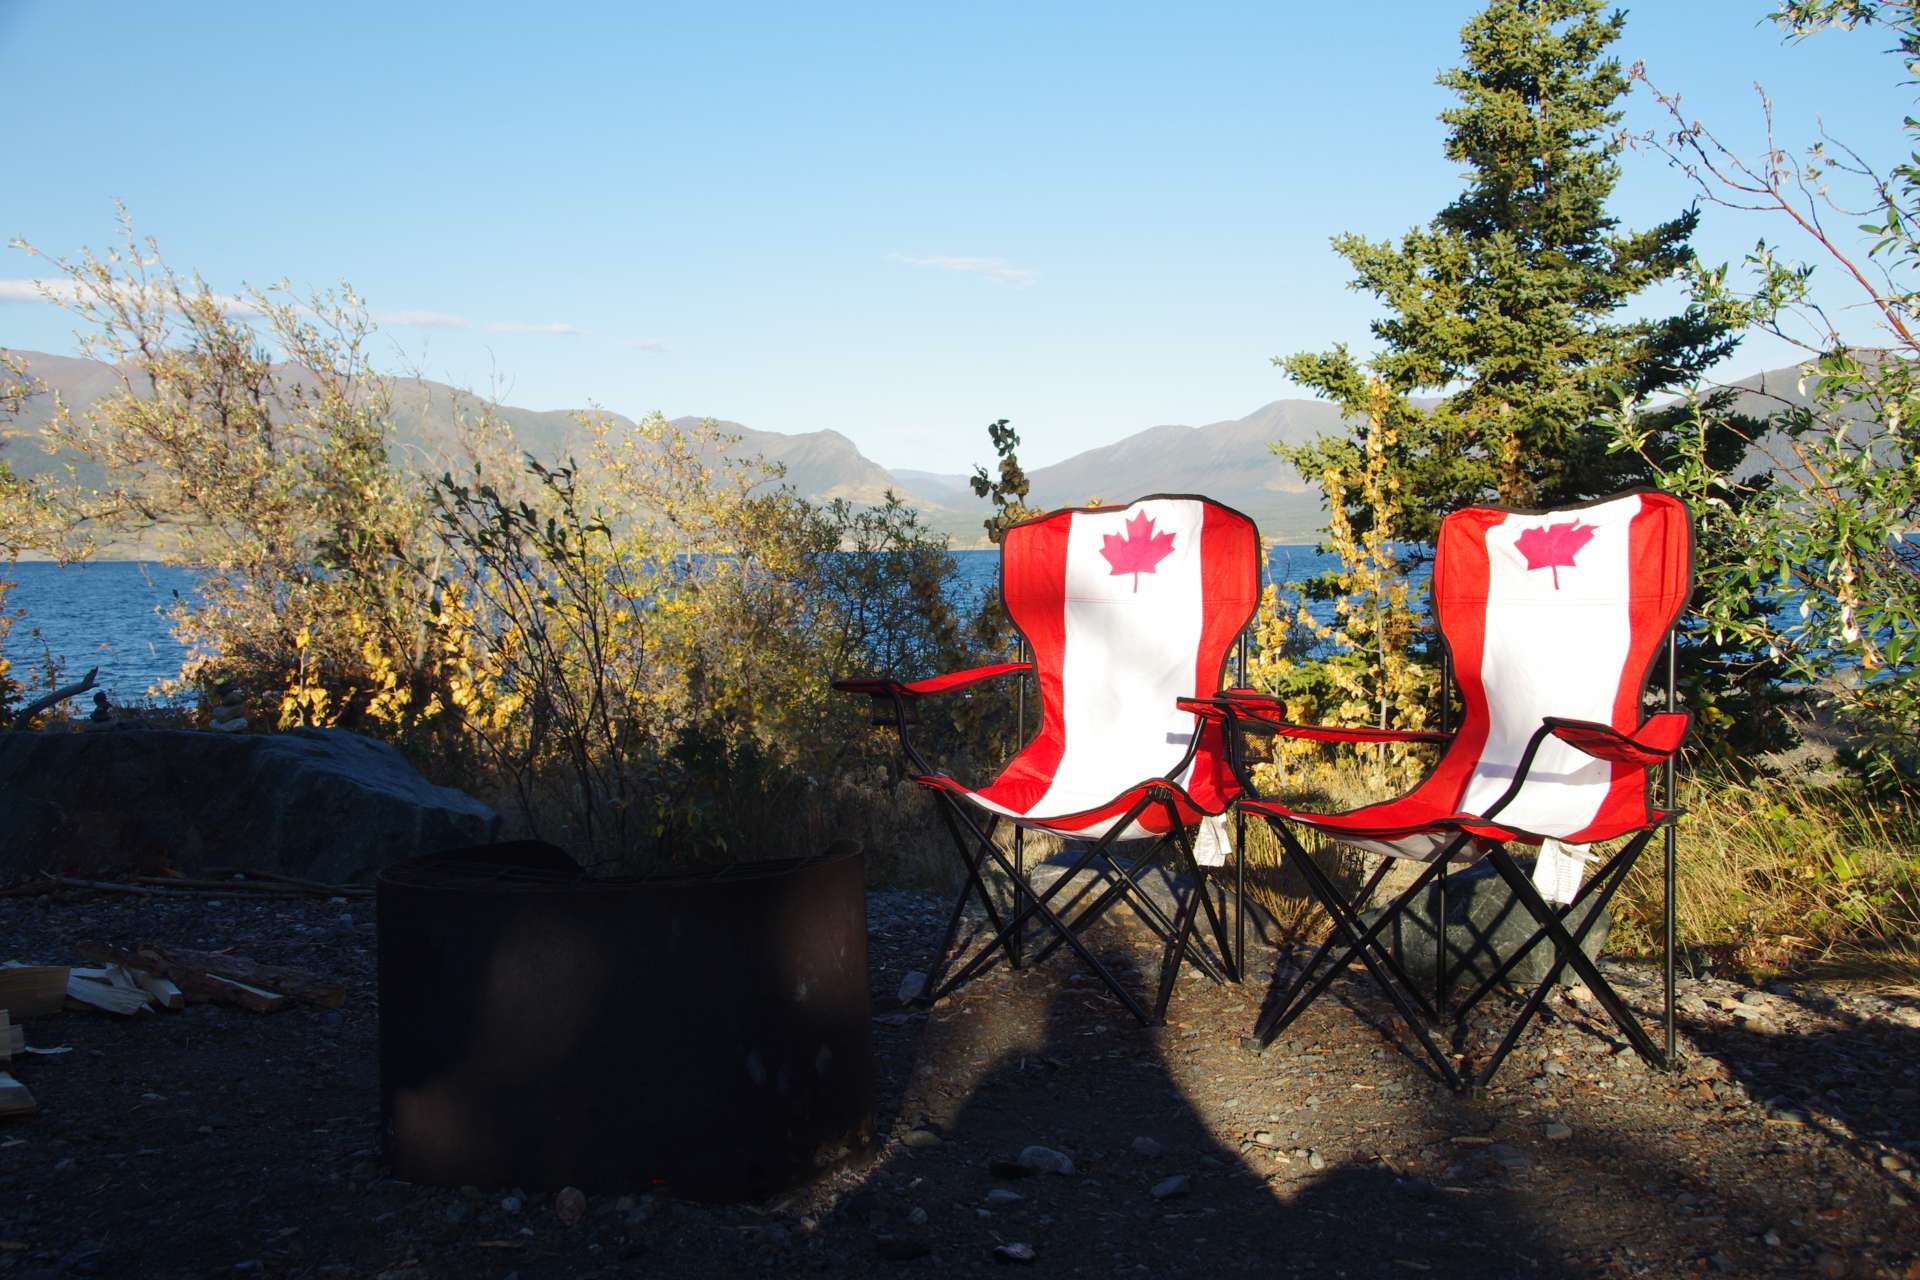 Camping chairs during daylight in the center of the picture with the canadian flag printed on them and with a lake, some trees and a hill range in the background